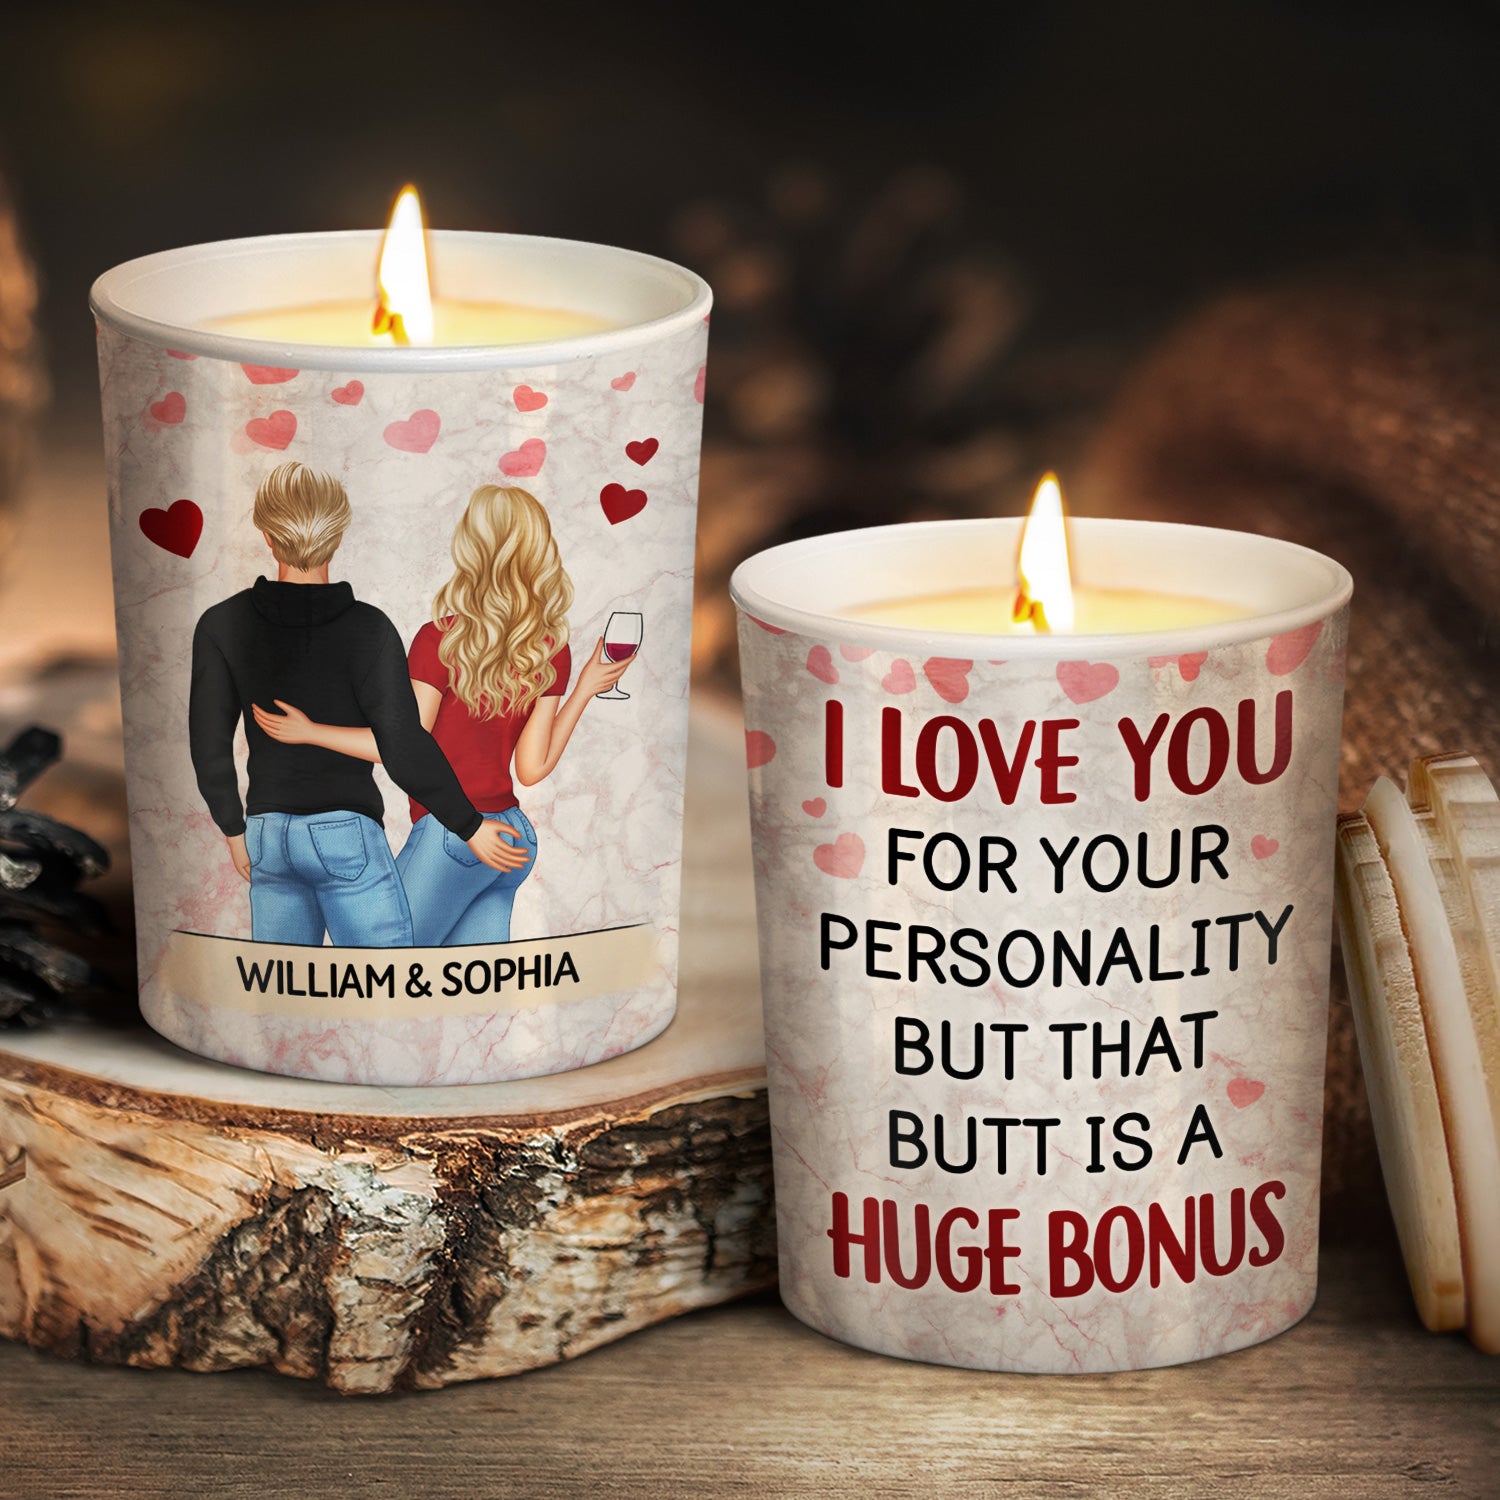 I Love You For Your Personality - Funny, Anniversary, Birthday Gifts For Couples, Husband, Wife - Personalized Scented Candle With Wooden Lid